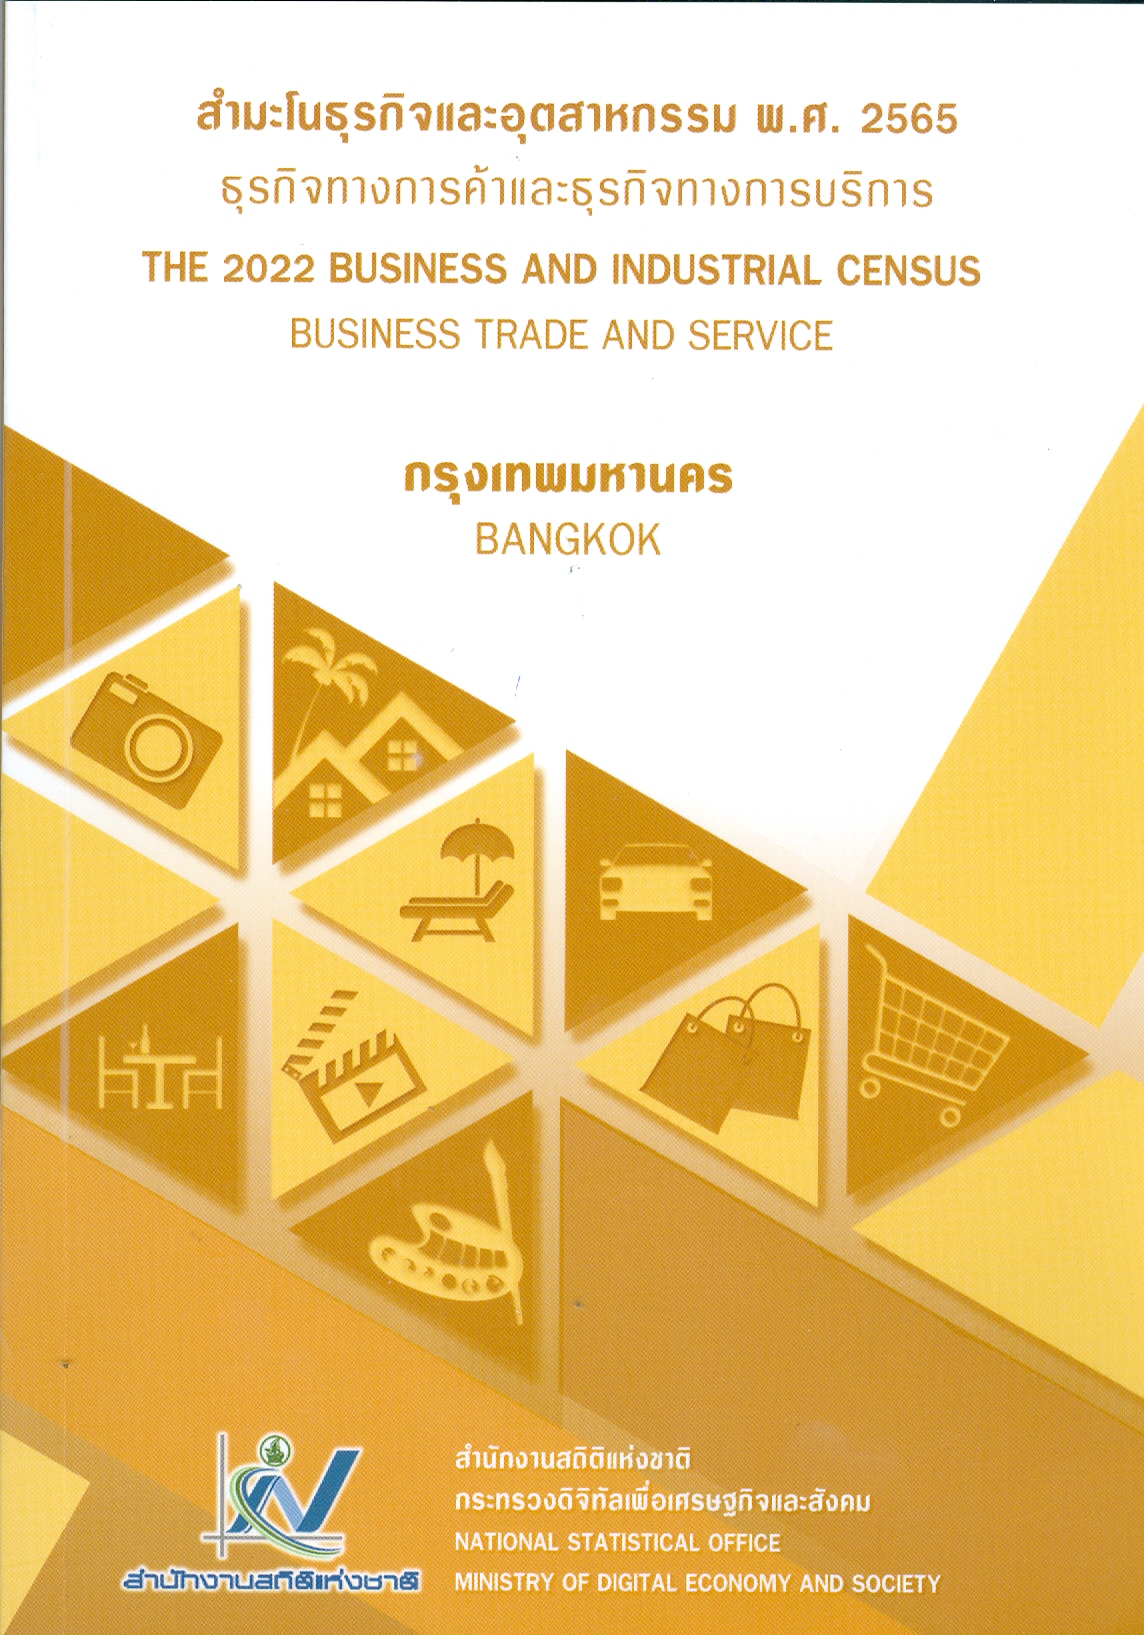 The Business and Industrial Census 2012 : Trade and Services Industry 2022 BANGKOK